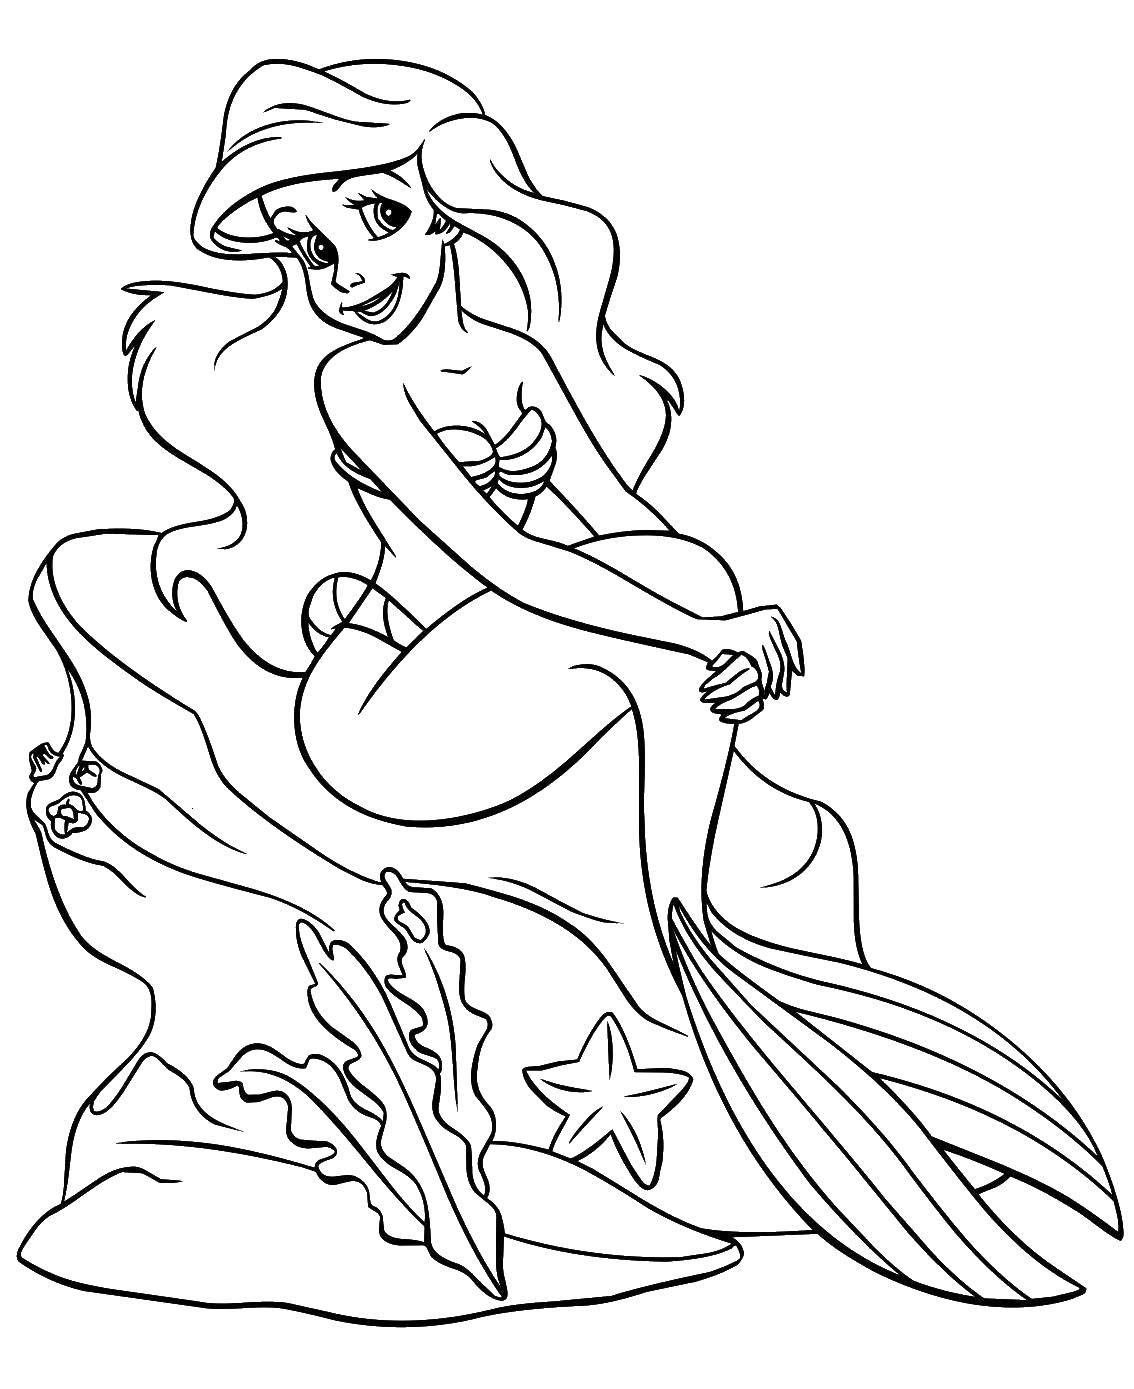 Coloring Ariel and stone. Category the little mermaid Ariel. Tags:  Ariel, stone, mermaid.